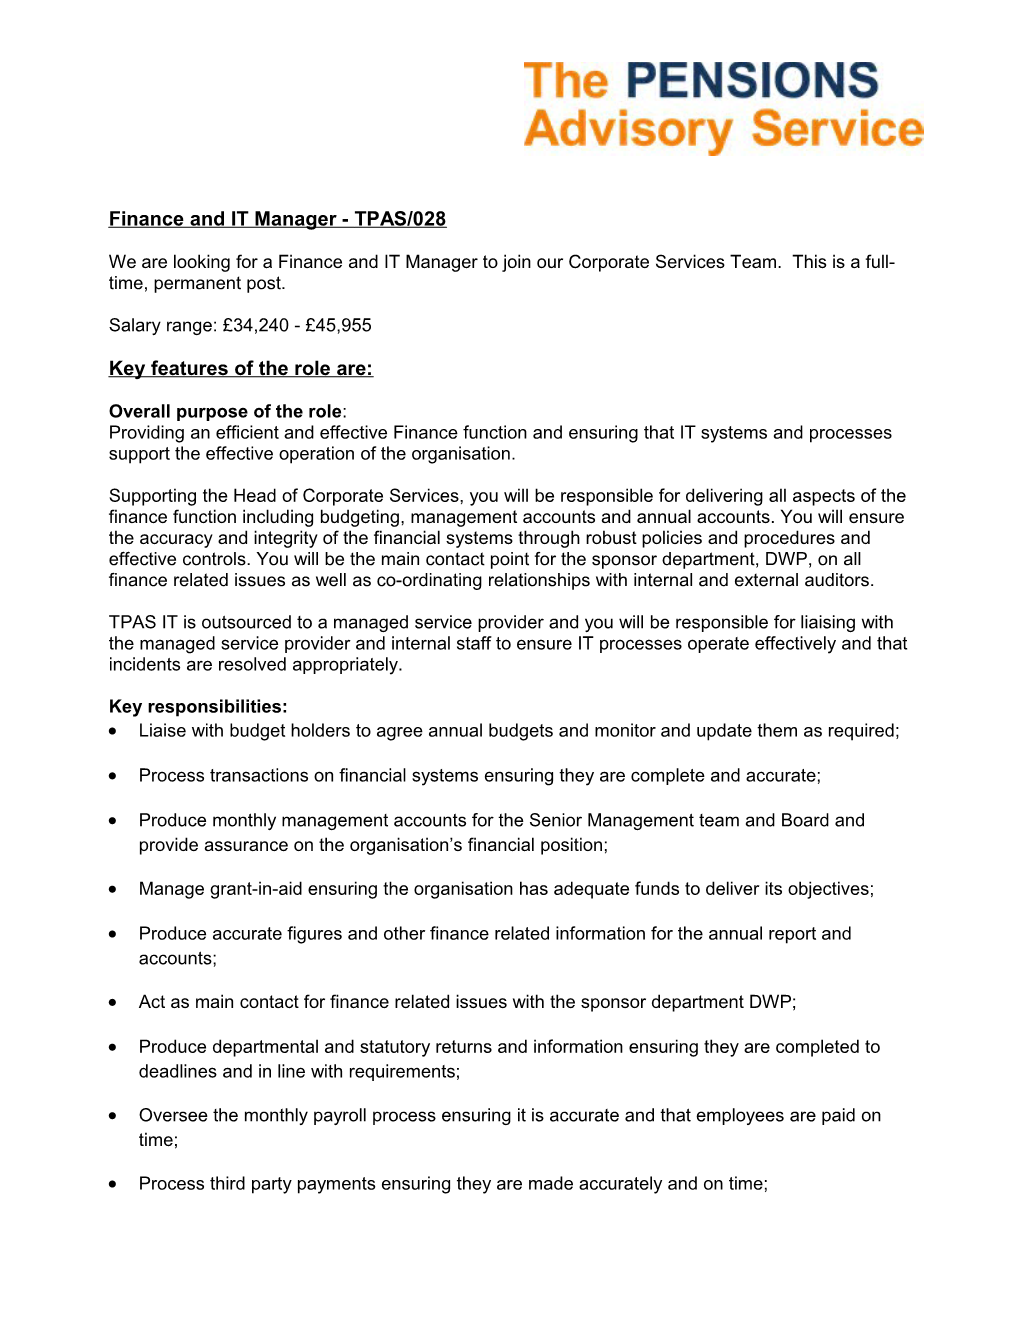 Finance and IT Manager - TPAS/028